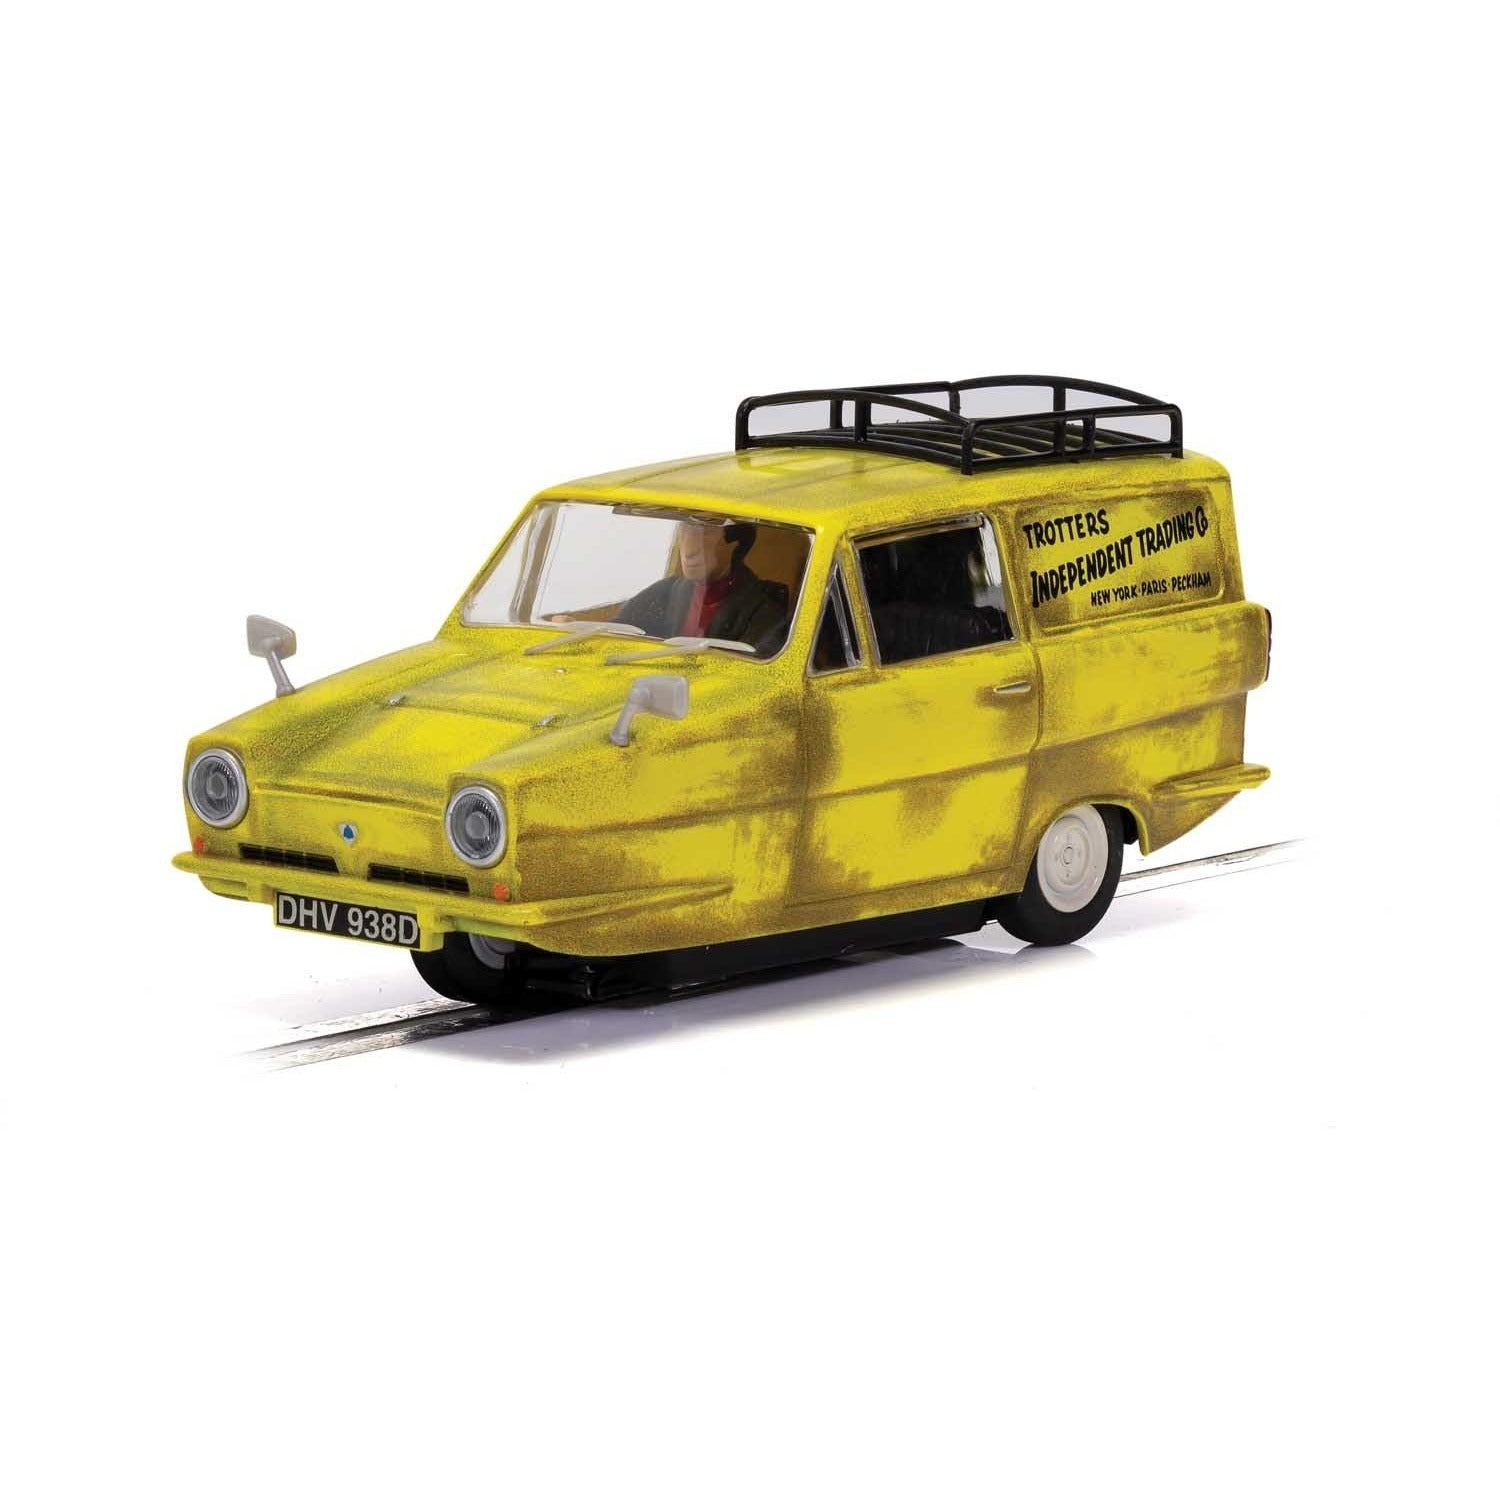 SCALEXTRIC Reliant Regal Supervan - Only Fools and Horses